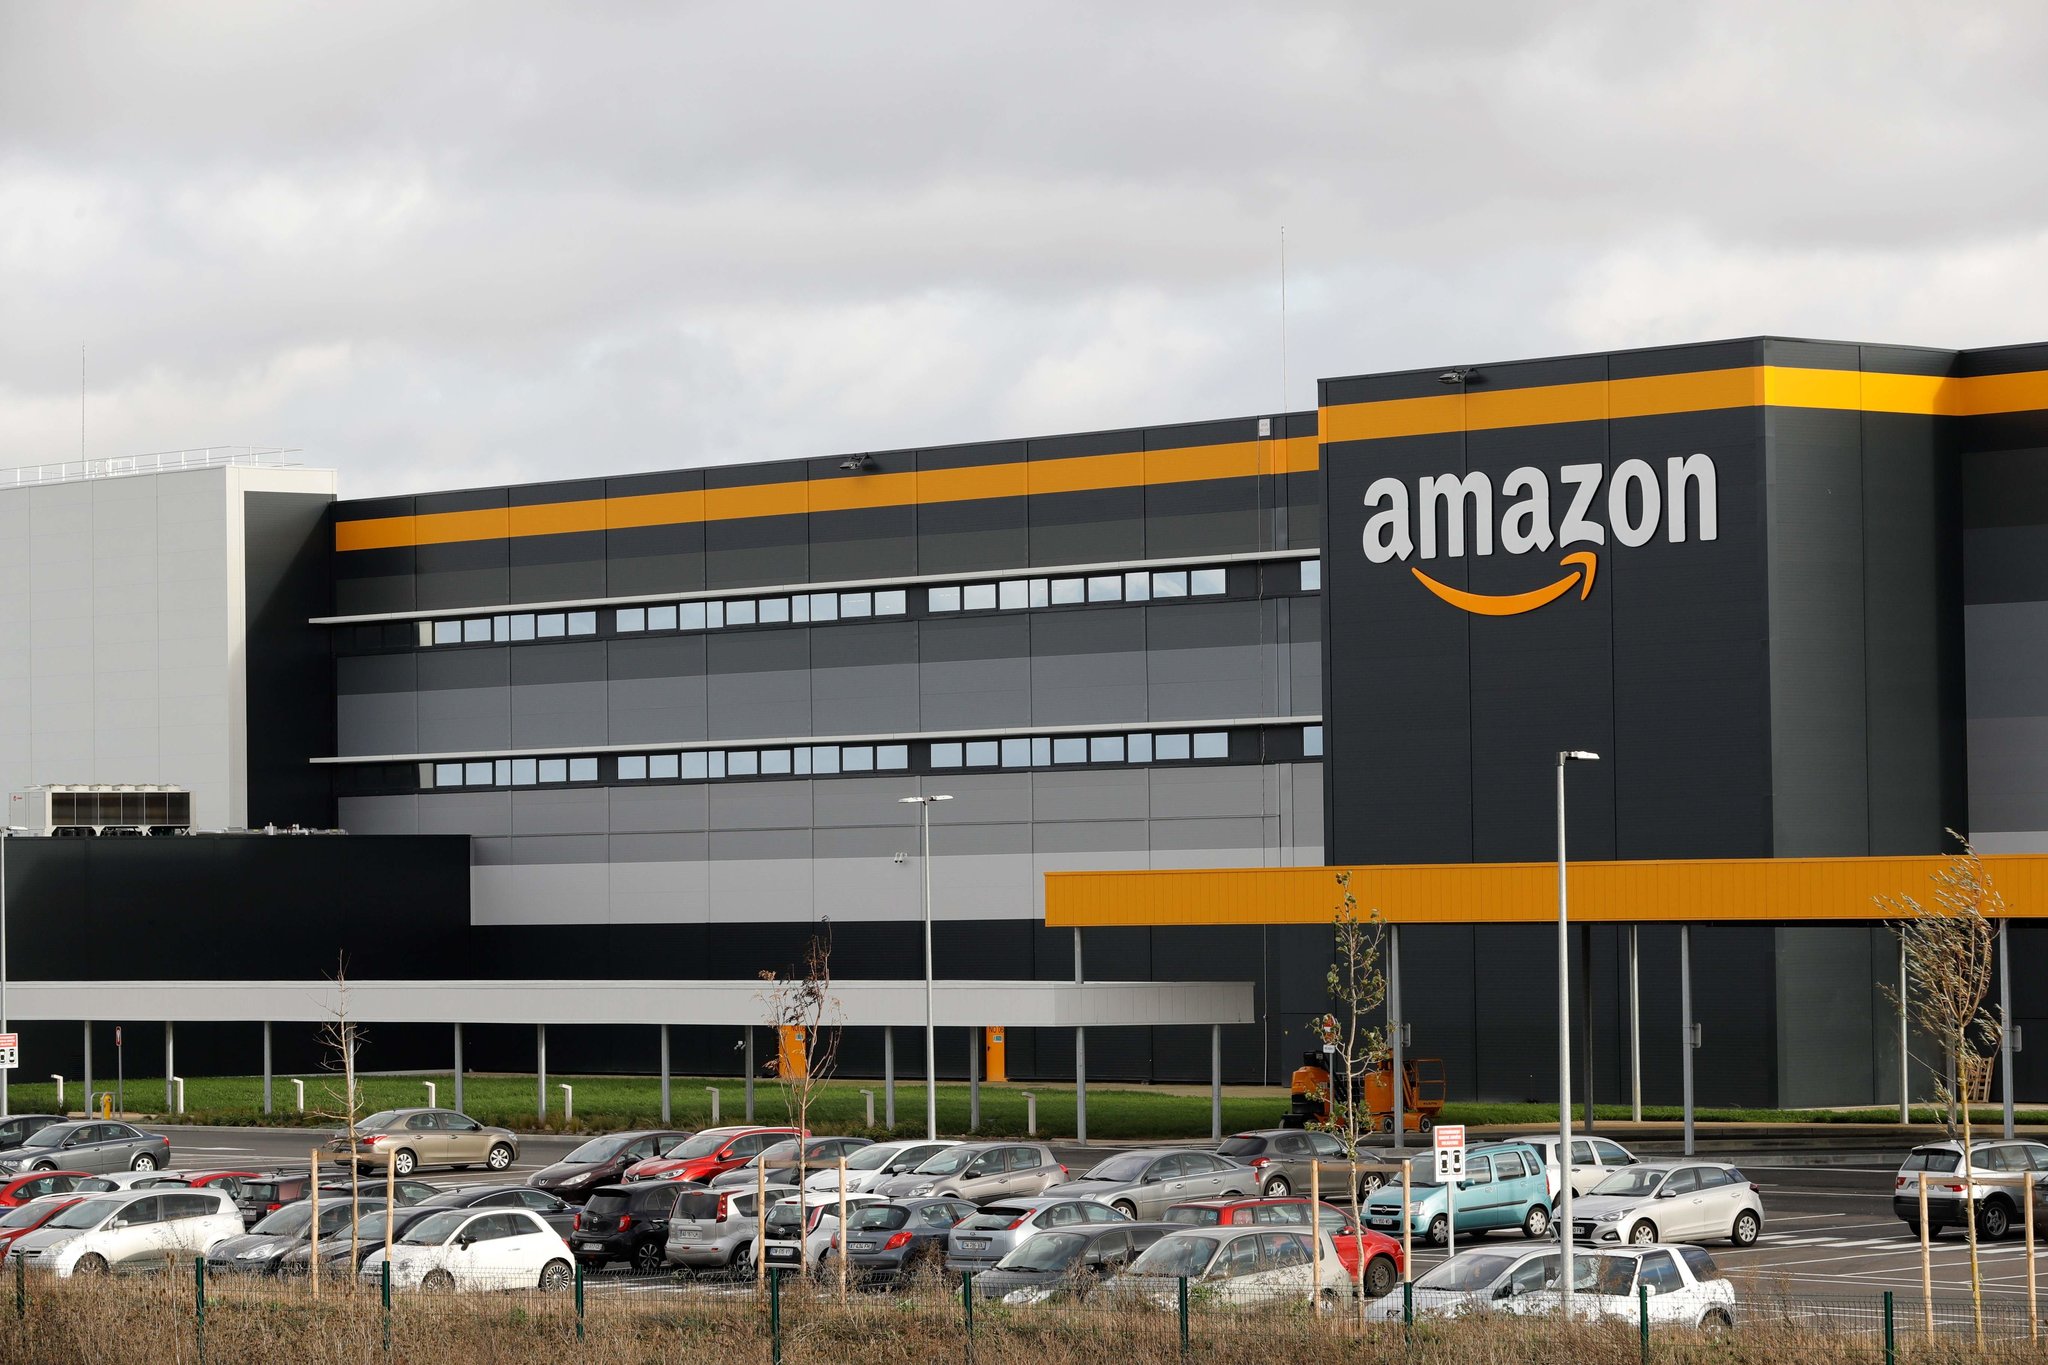 Nearly 4,000 Amazon Staff Given Wrong Test Results